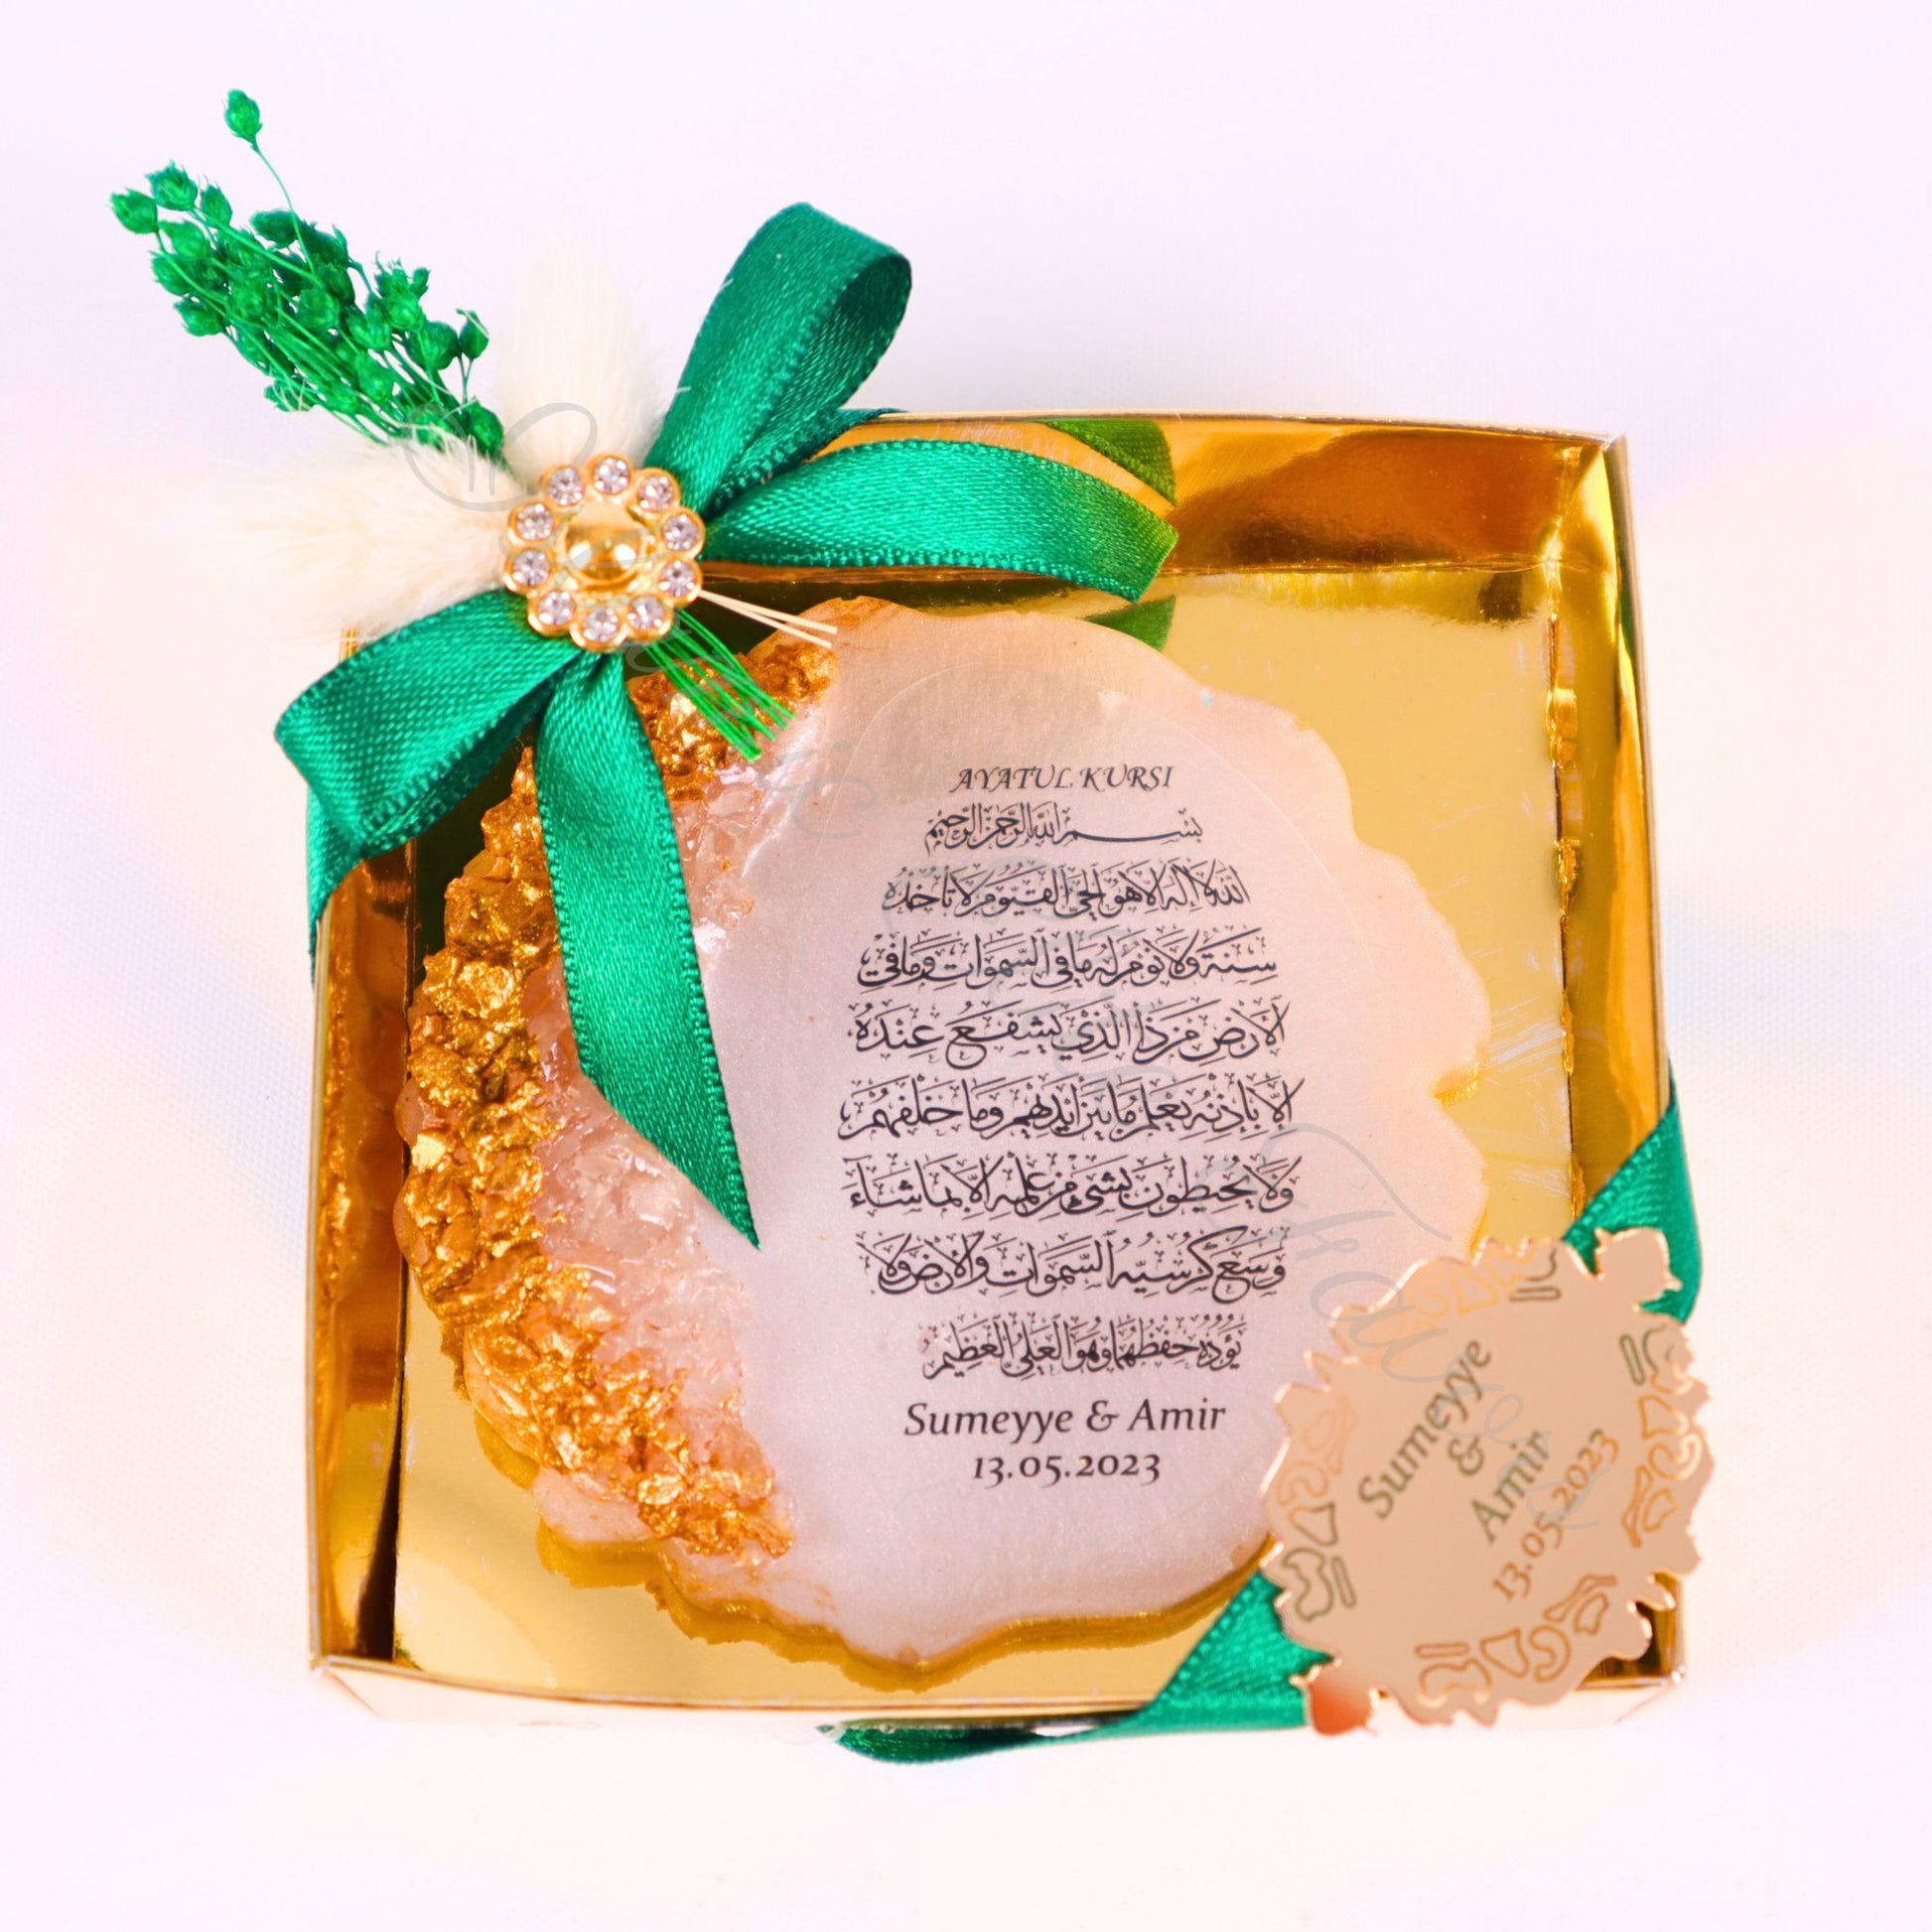 Personalized Wedding Favor Epoxy Ayatul Kursi Magnet in Gold Gift Box - Islamic Elite Favors is a handmade gift shop offering a wide variety of unique and personalized gifts for all occasions. Whether you're looking for the perfect Ramadan, Eid, Hajj, wedding gift or something special for a birthday, baby shower or anniversary, we have something for everyone. High quality, made with love.